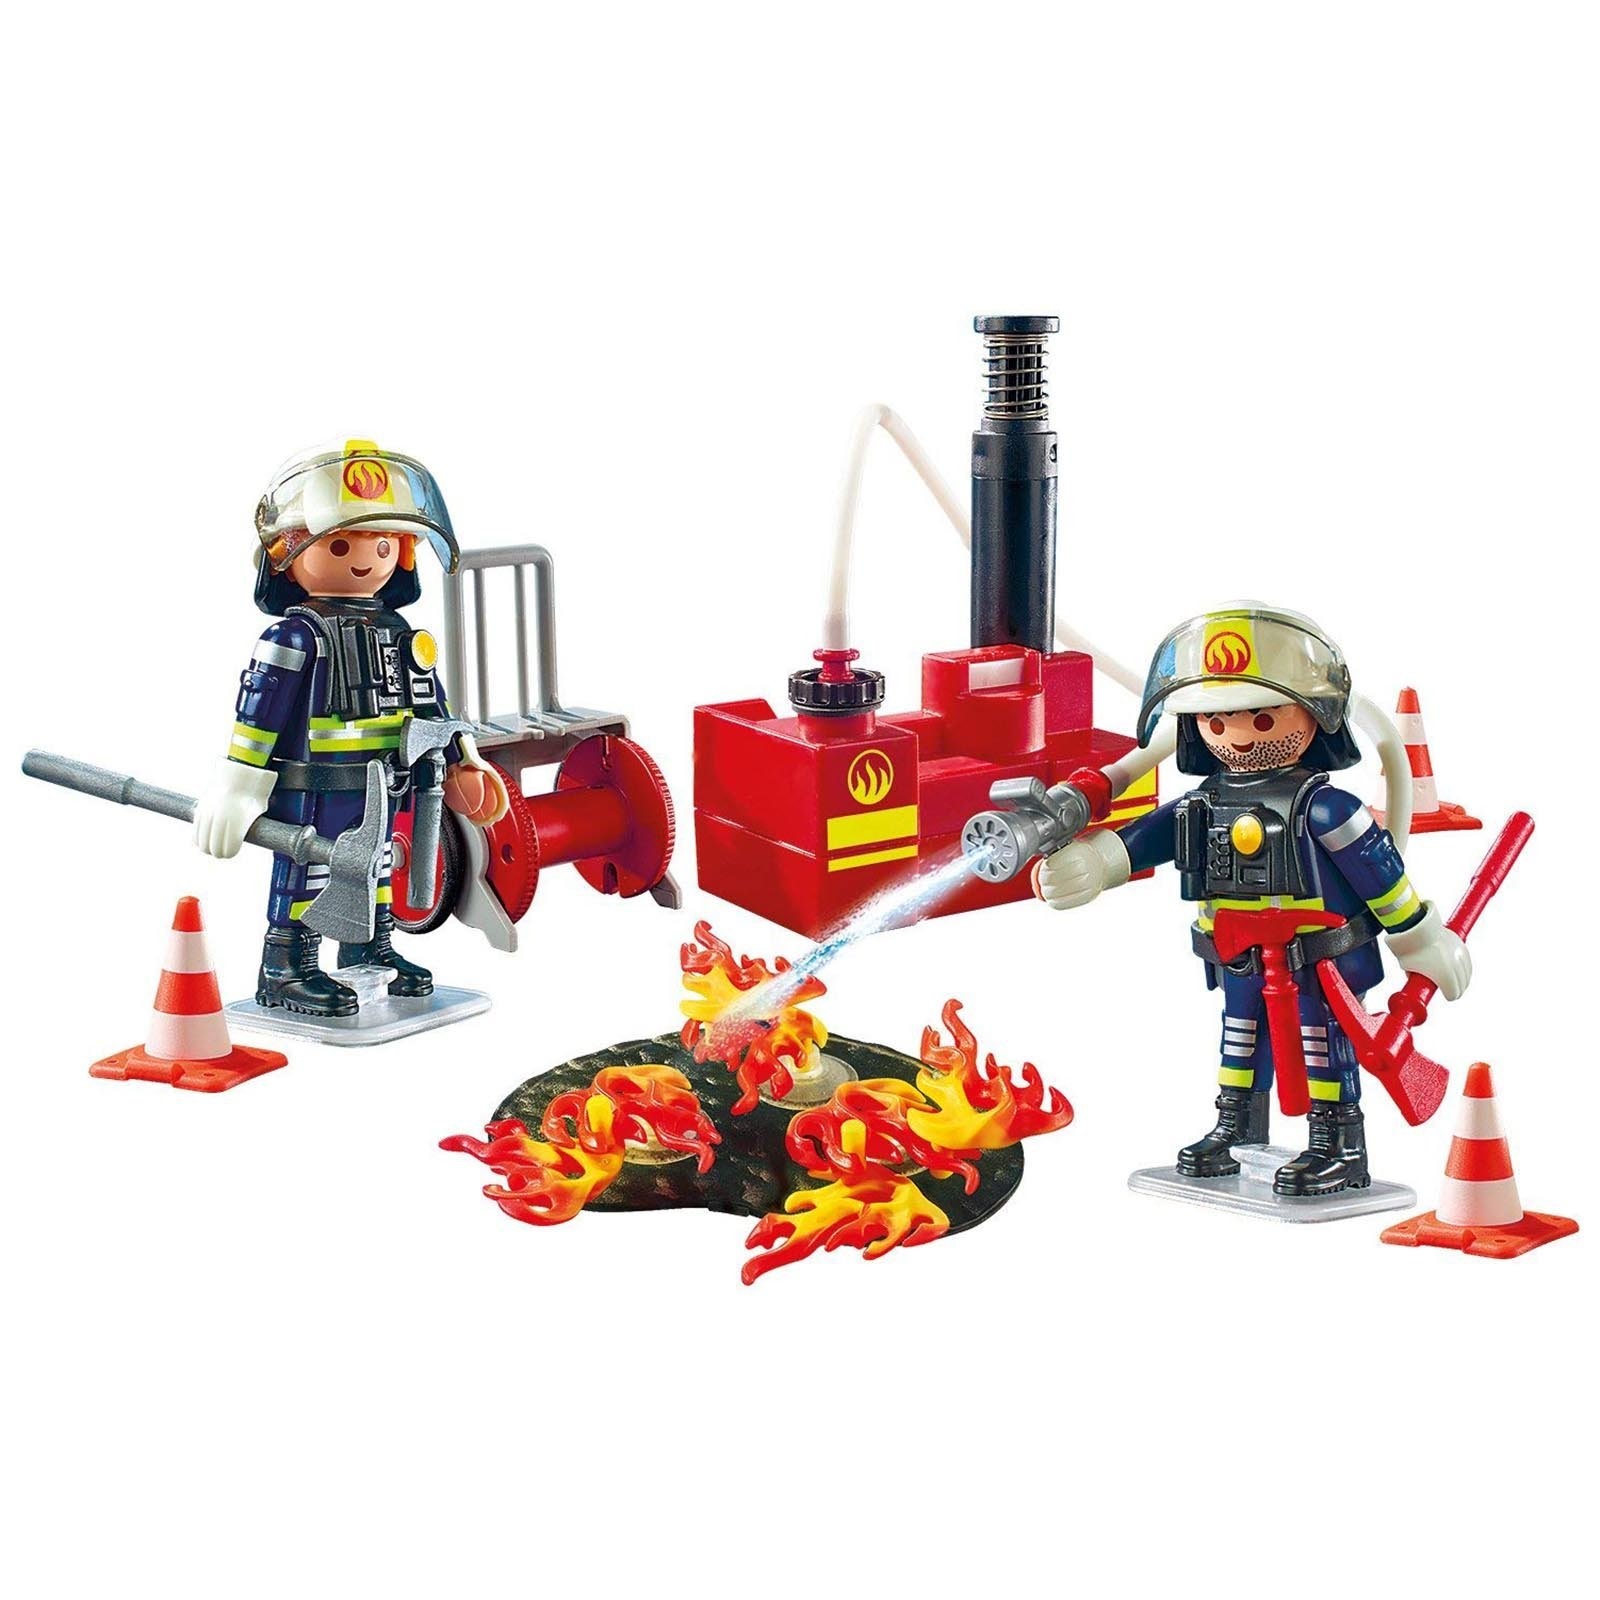 PLAYMOBIL Firefighting Operation with Water Pump - image 1 of 5